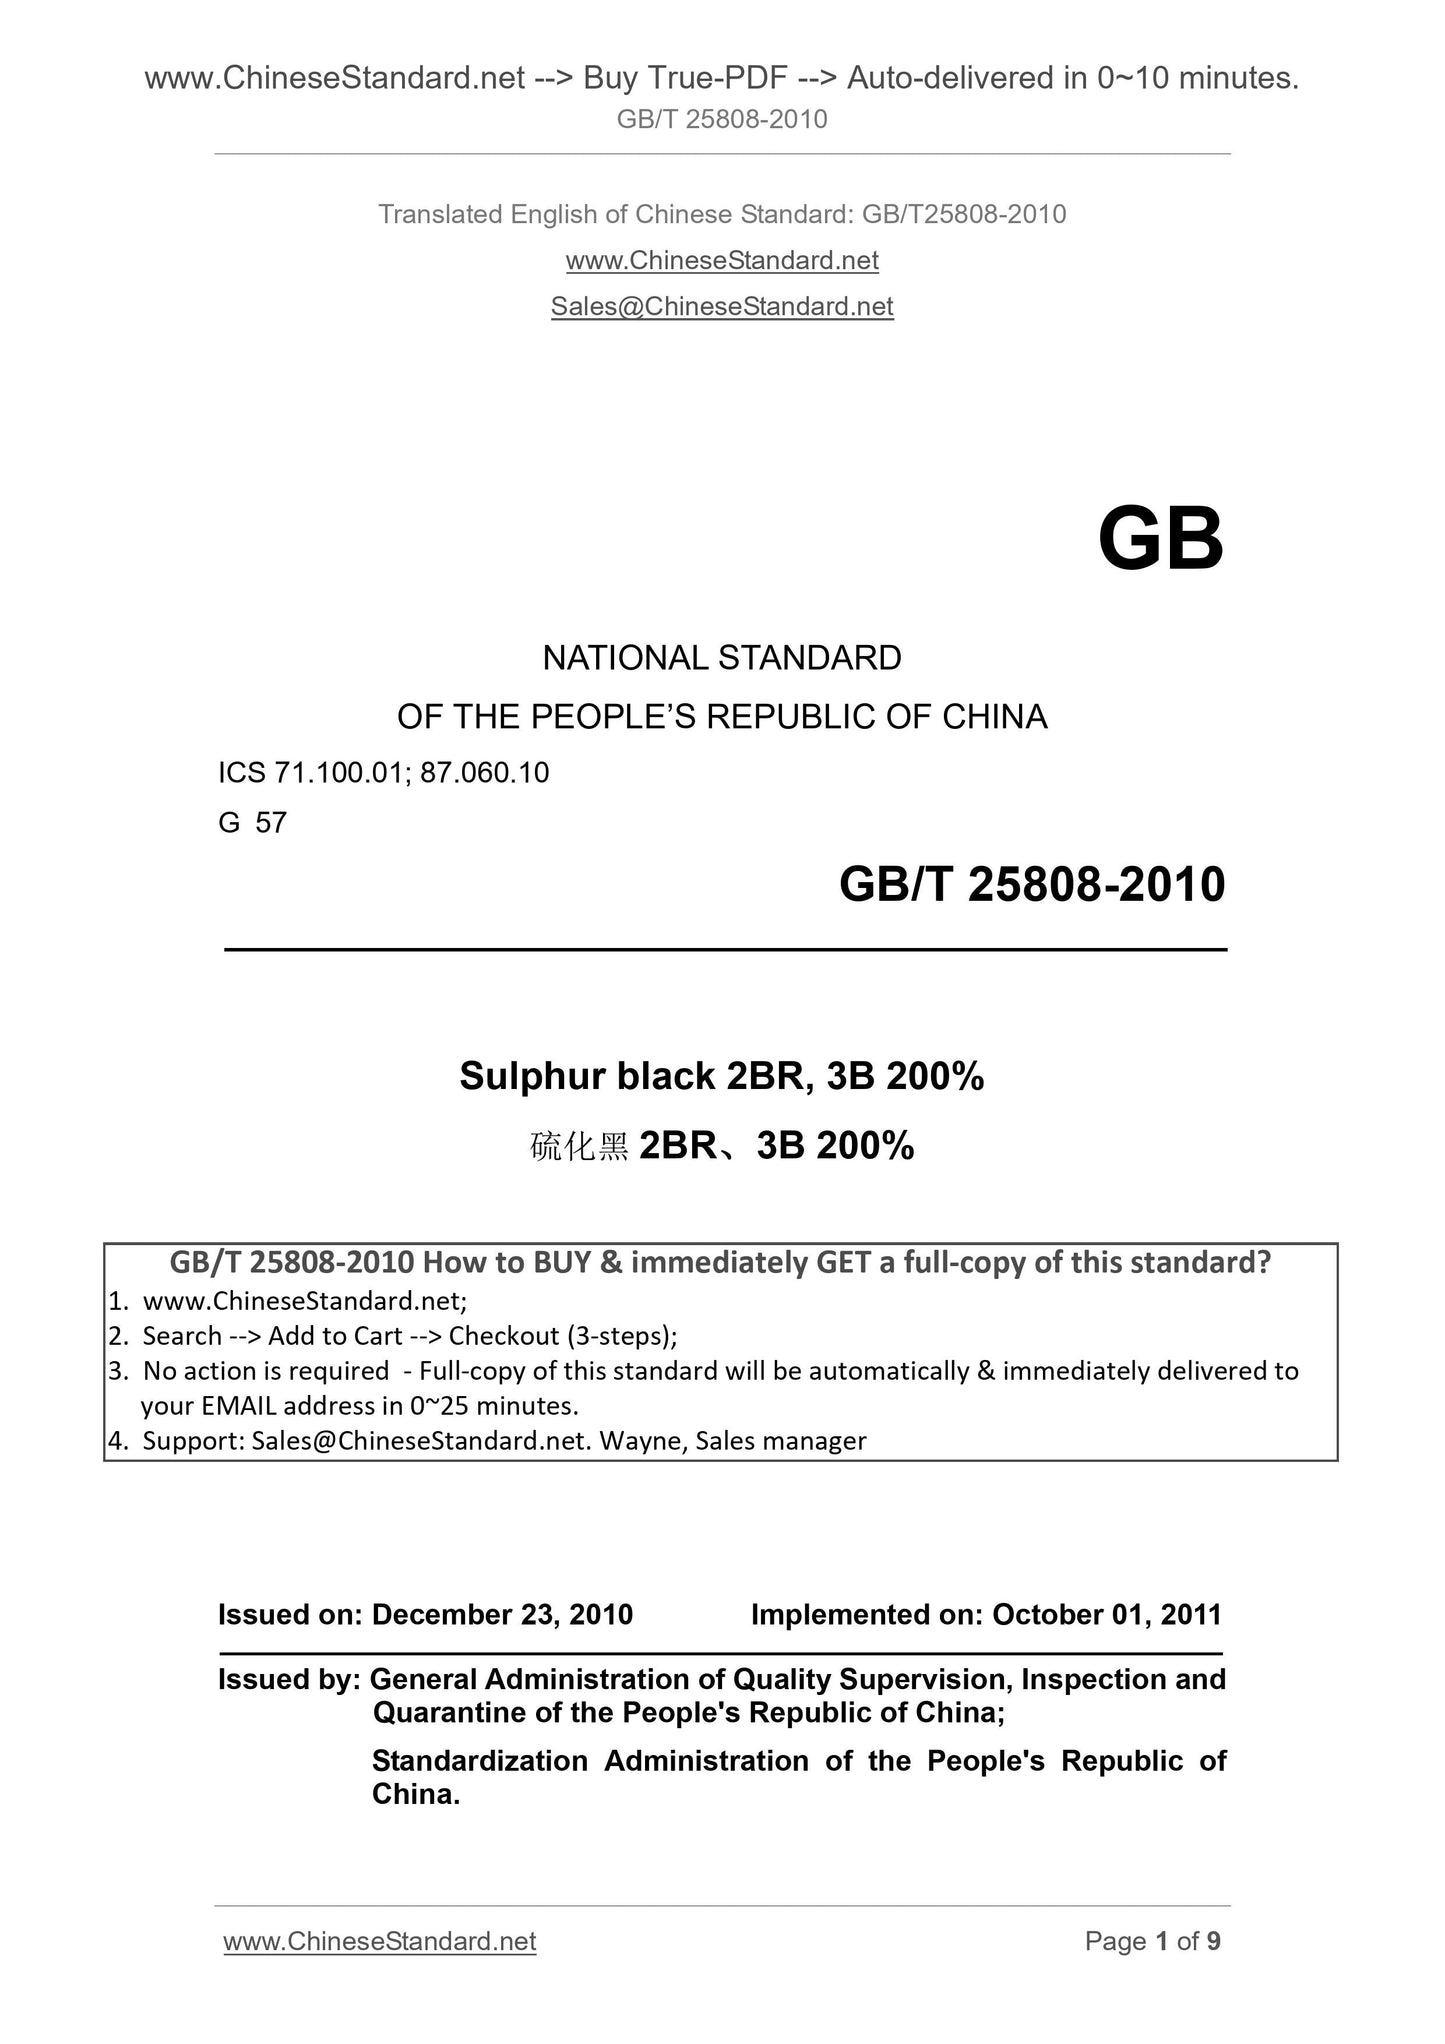 GB/T 25808-2010 Page 1